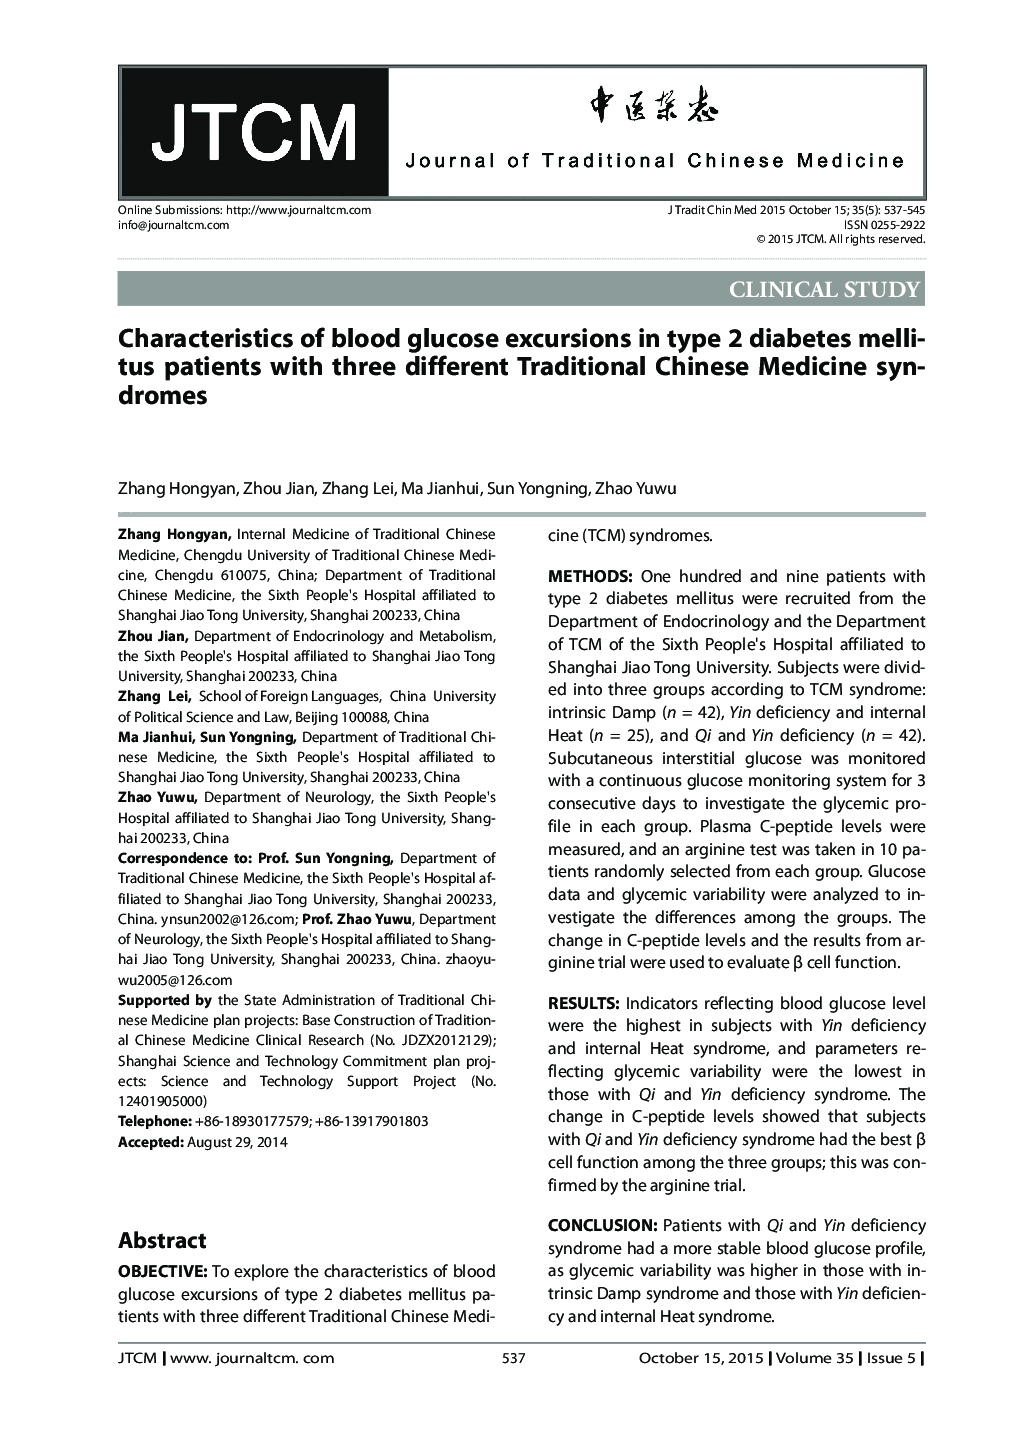 Characteristics of blood glucose excursions in type 2 diabetes mellitus patients with three different Traditional Chinese Medicine syndromes 